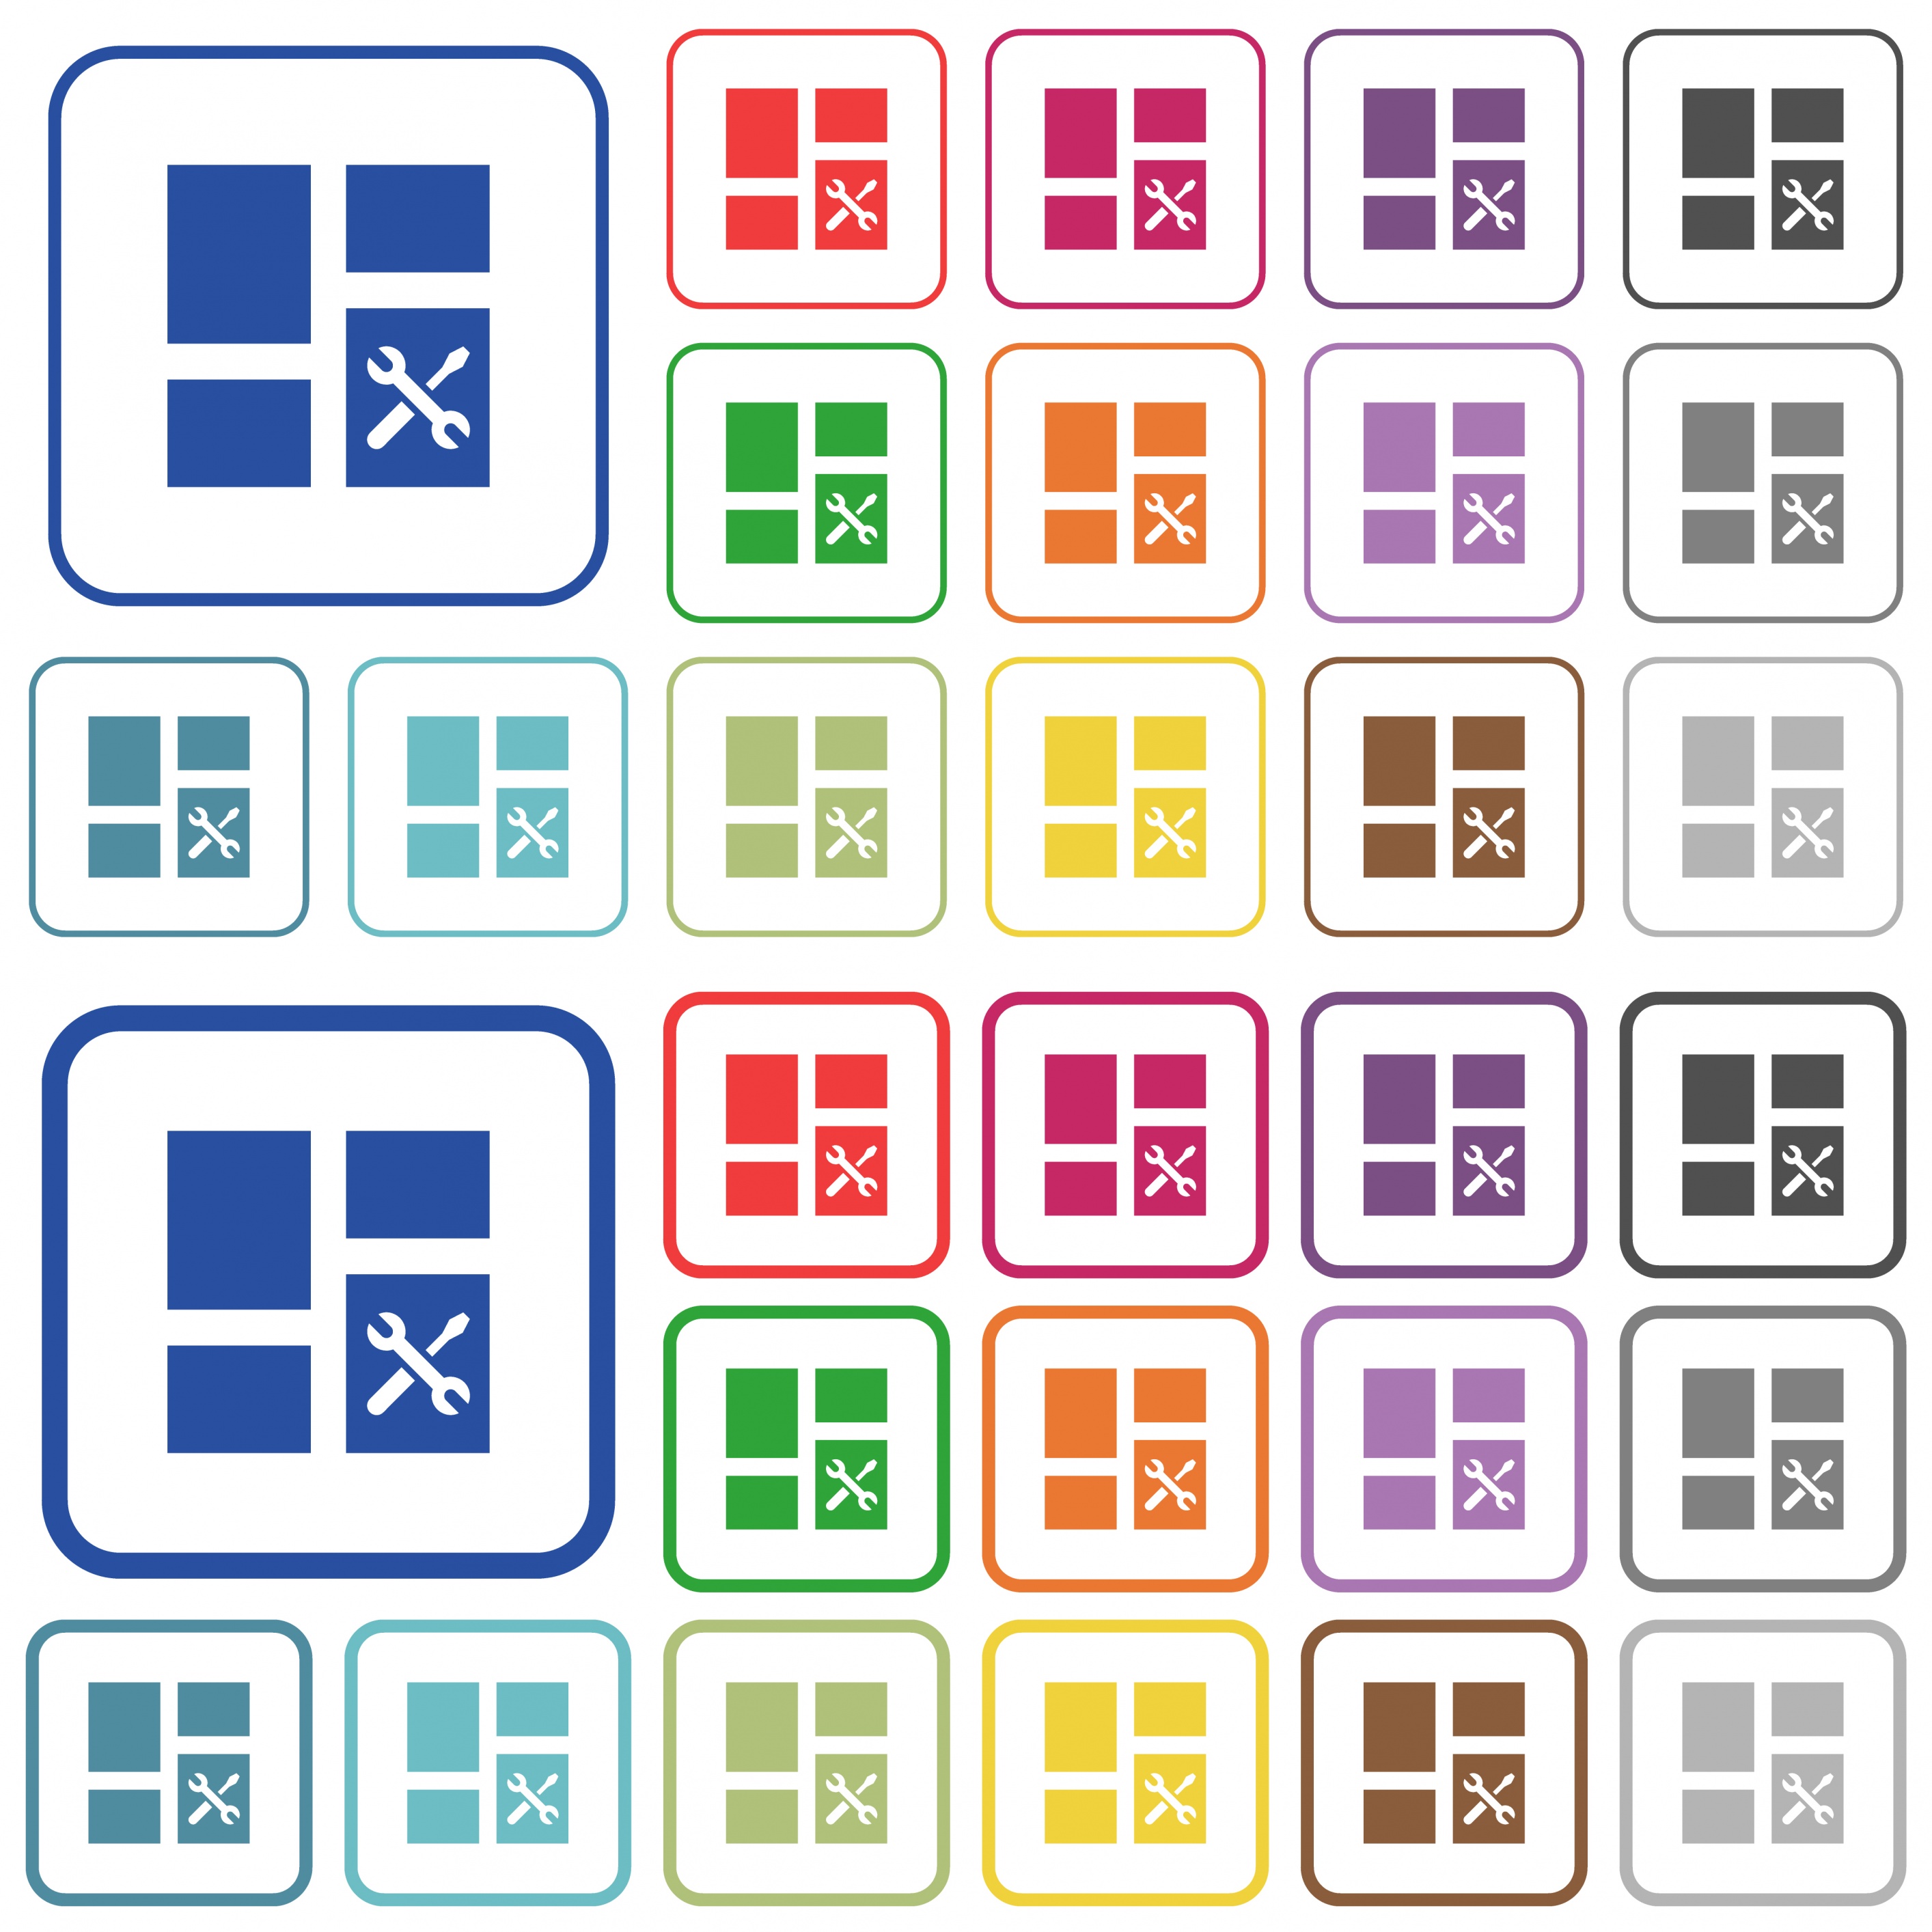 Dashboard tools color flat icons in rounded square frames. Thin and thick versions included. - Free image